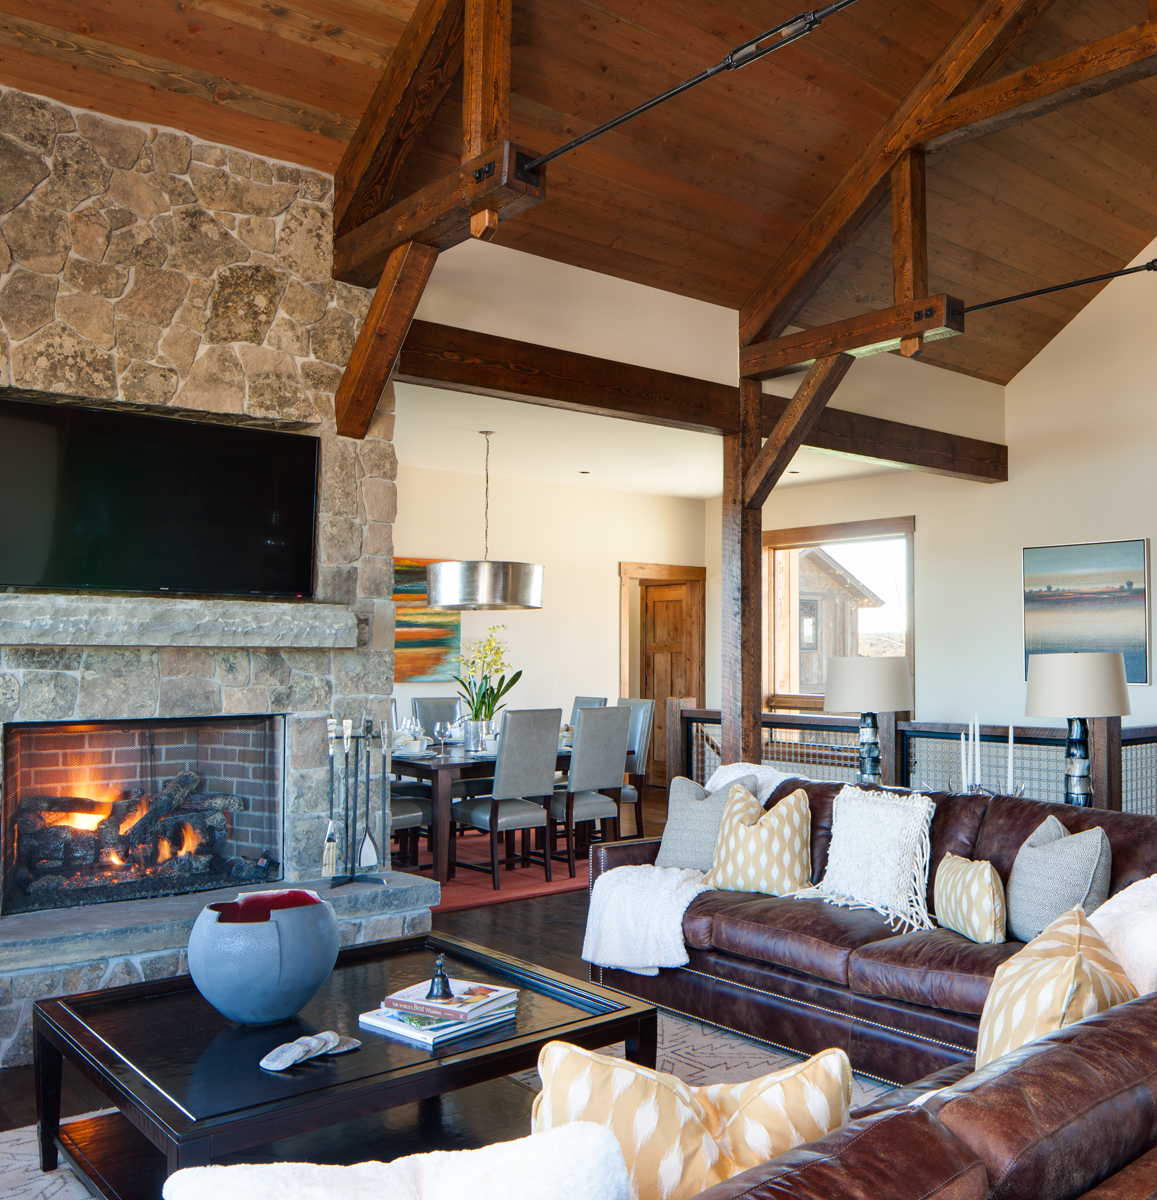 View of main living room in a mountain rustic home in eastern Idaho. The dining area can be seen in the back of the photo and in the forgrround we see a lit fireplace with a coffee table and a leather couch.Architectural Photography by: Paul Richer / RICHER IMAGES.